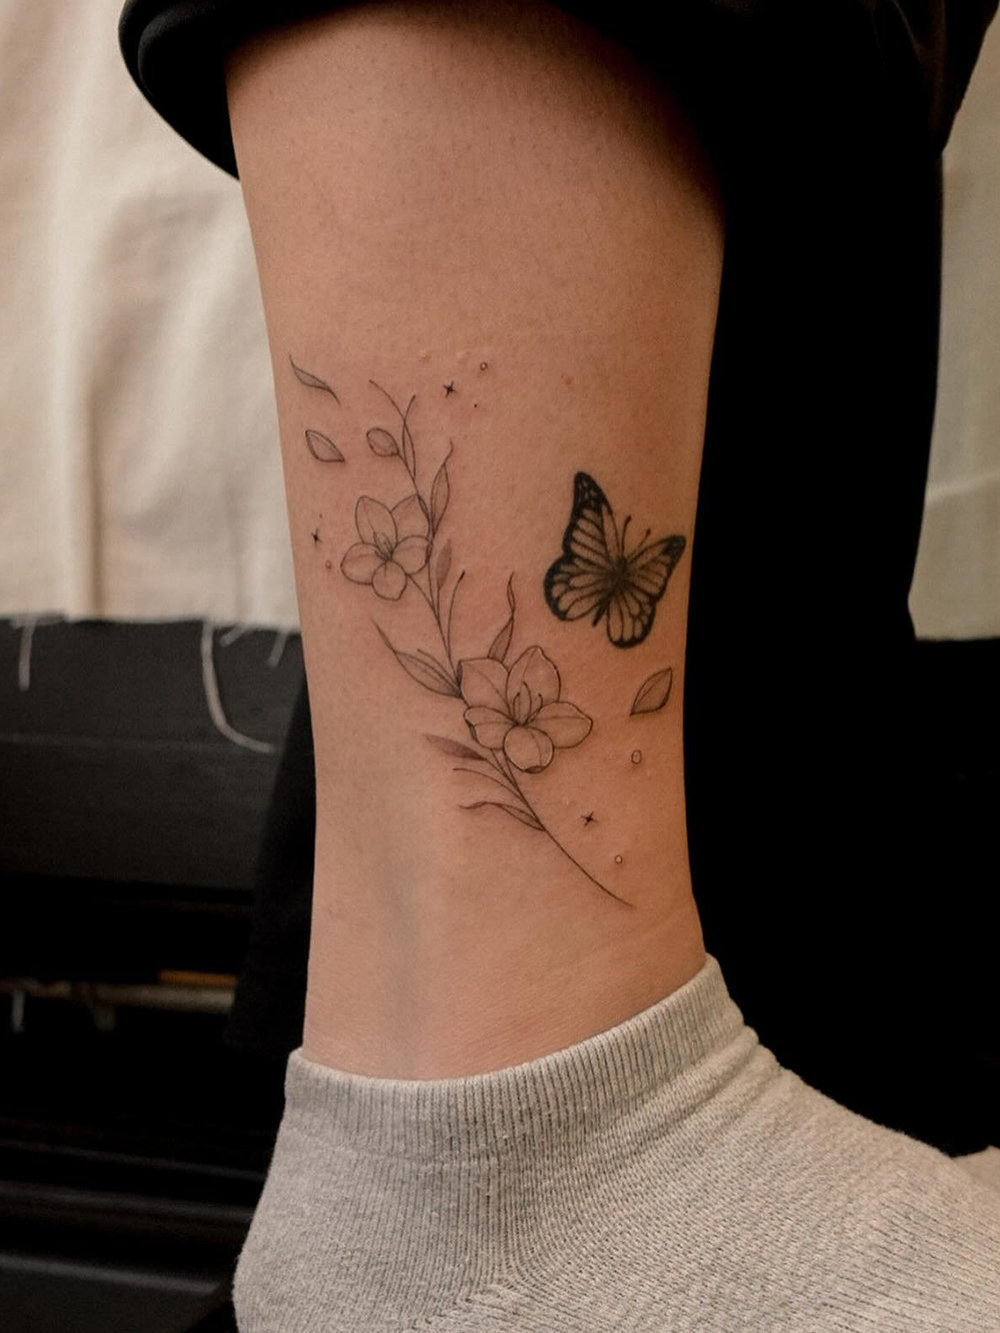 Floral and Butterfly Tattoo Designs on the Ankle